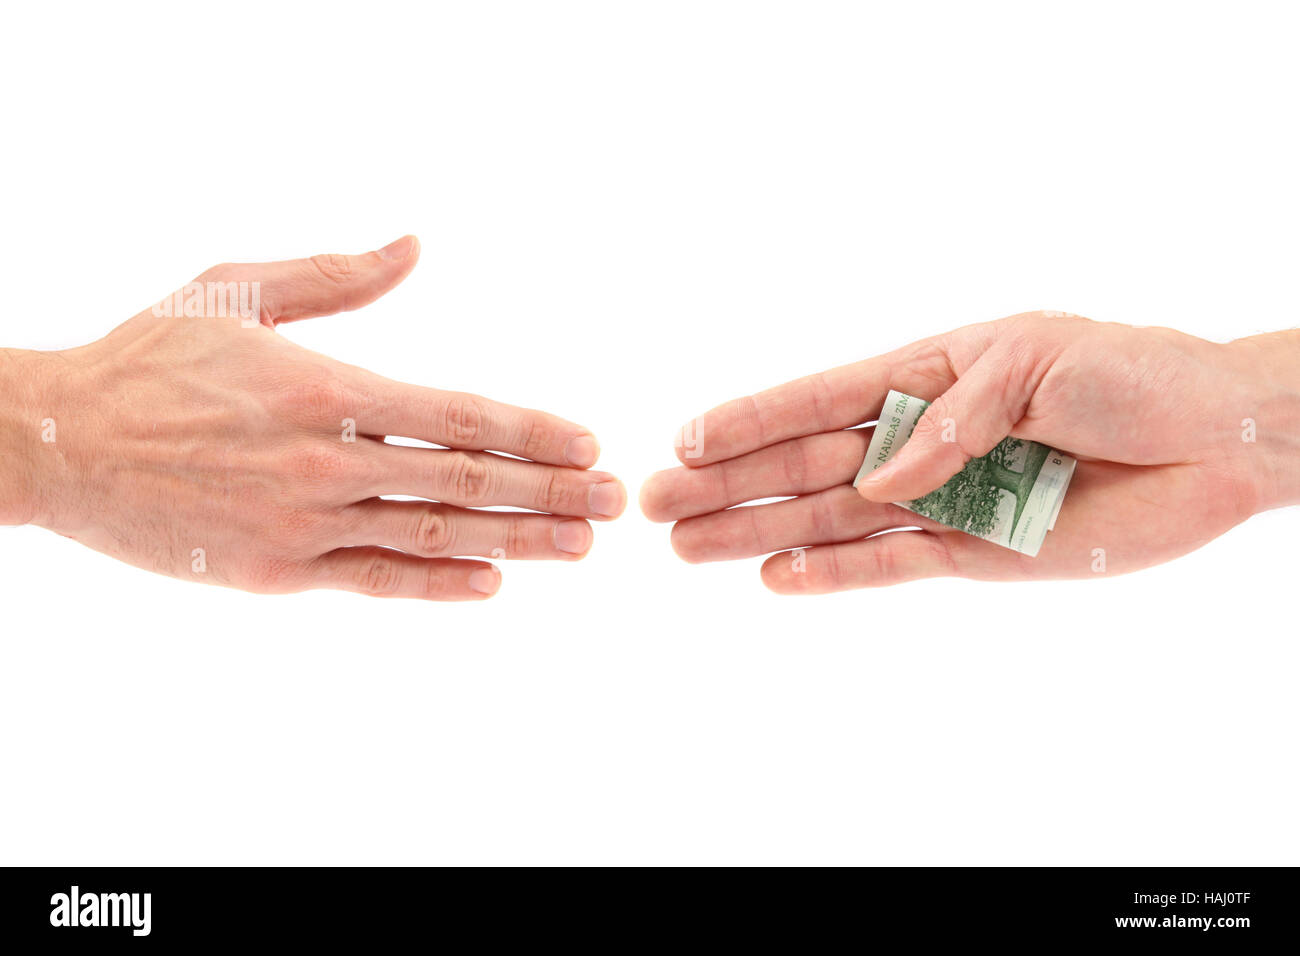 Corruption concept: hand giving bribe to other Stock Photo